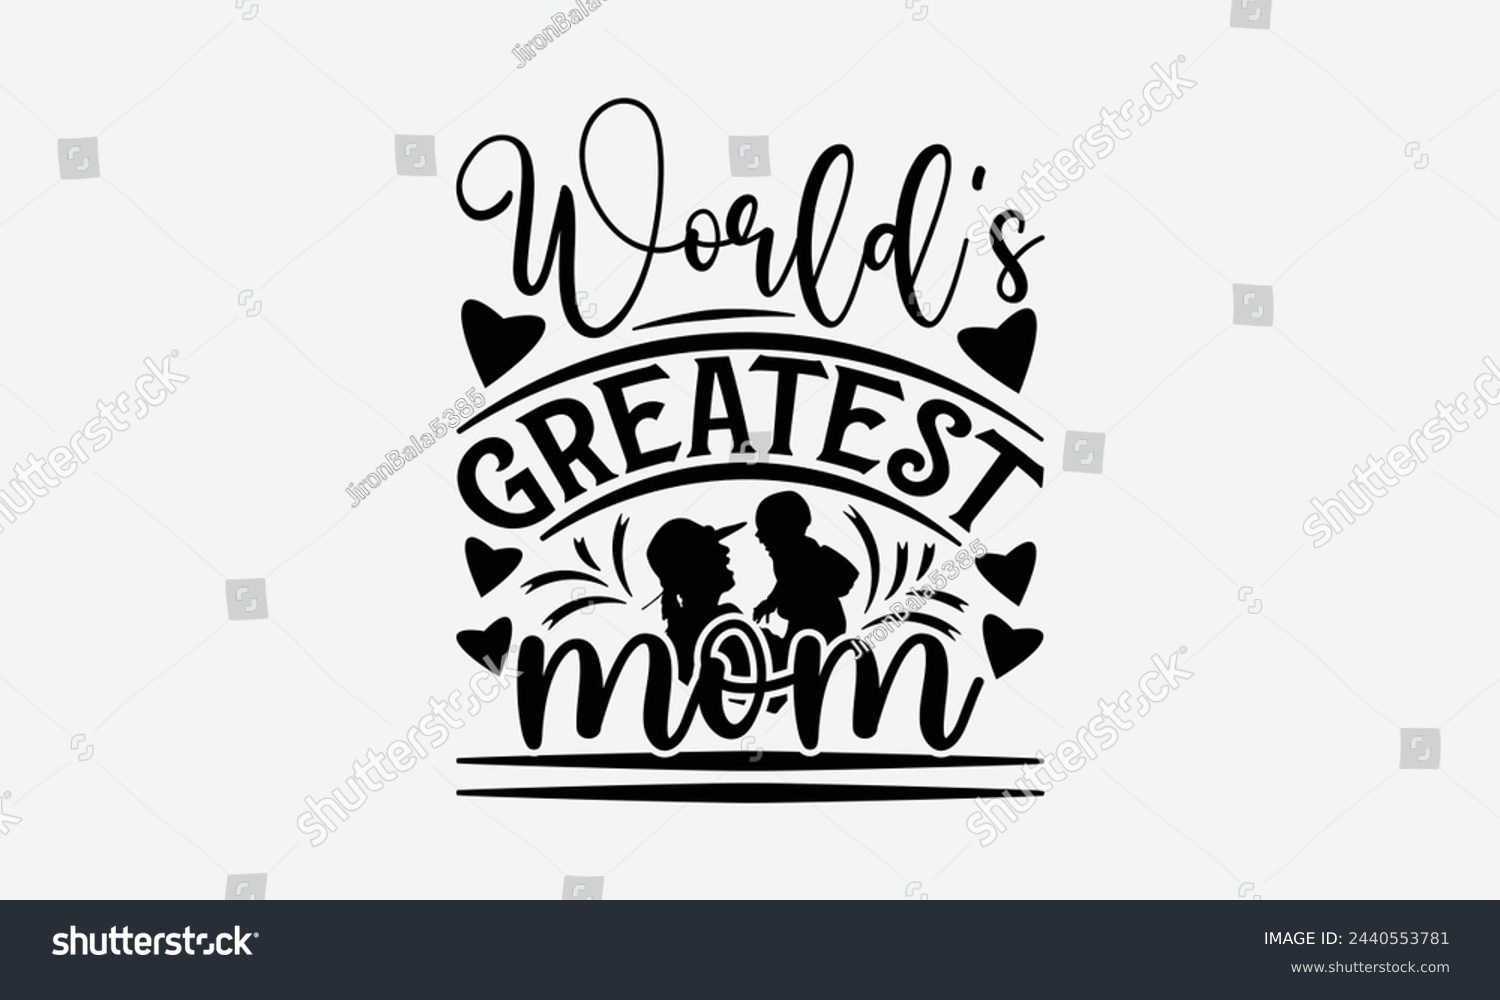 SVG of World's greatest mom - Mom t-shirt design, isolated on white background, this illustration can be used as a print on t-shirts and bags, cover book, template, stationary or as a poster. svg